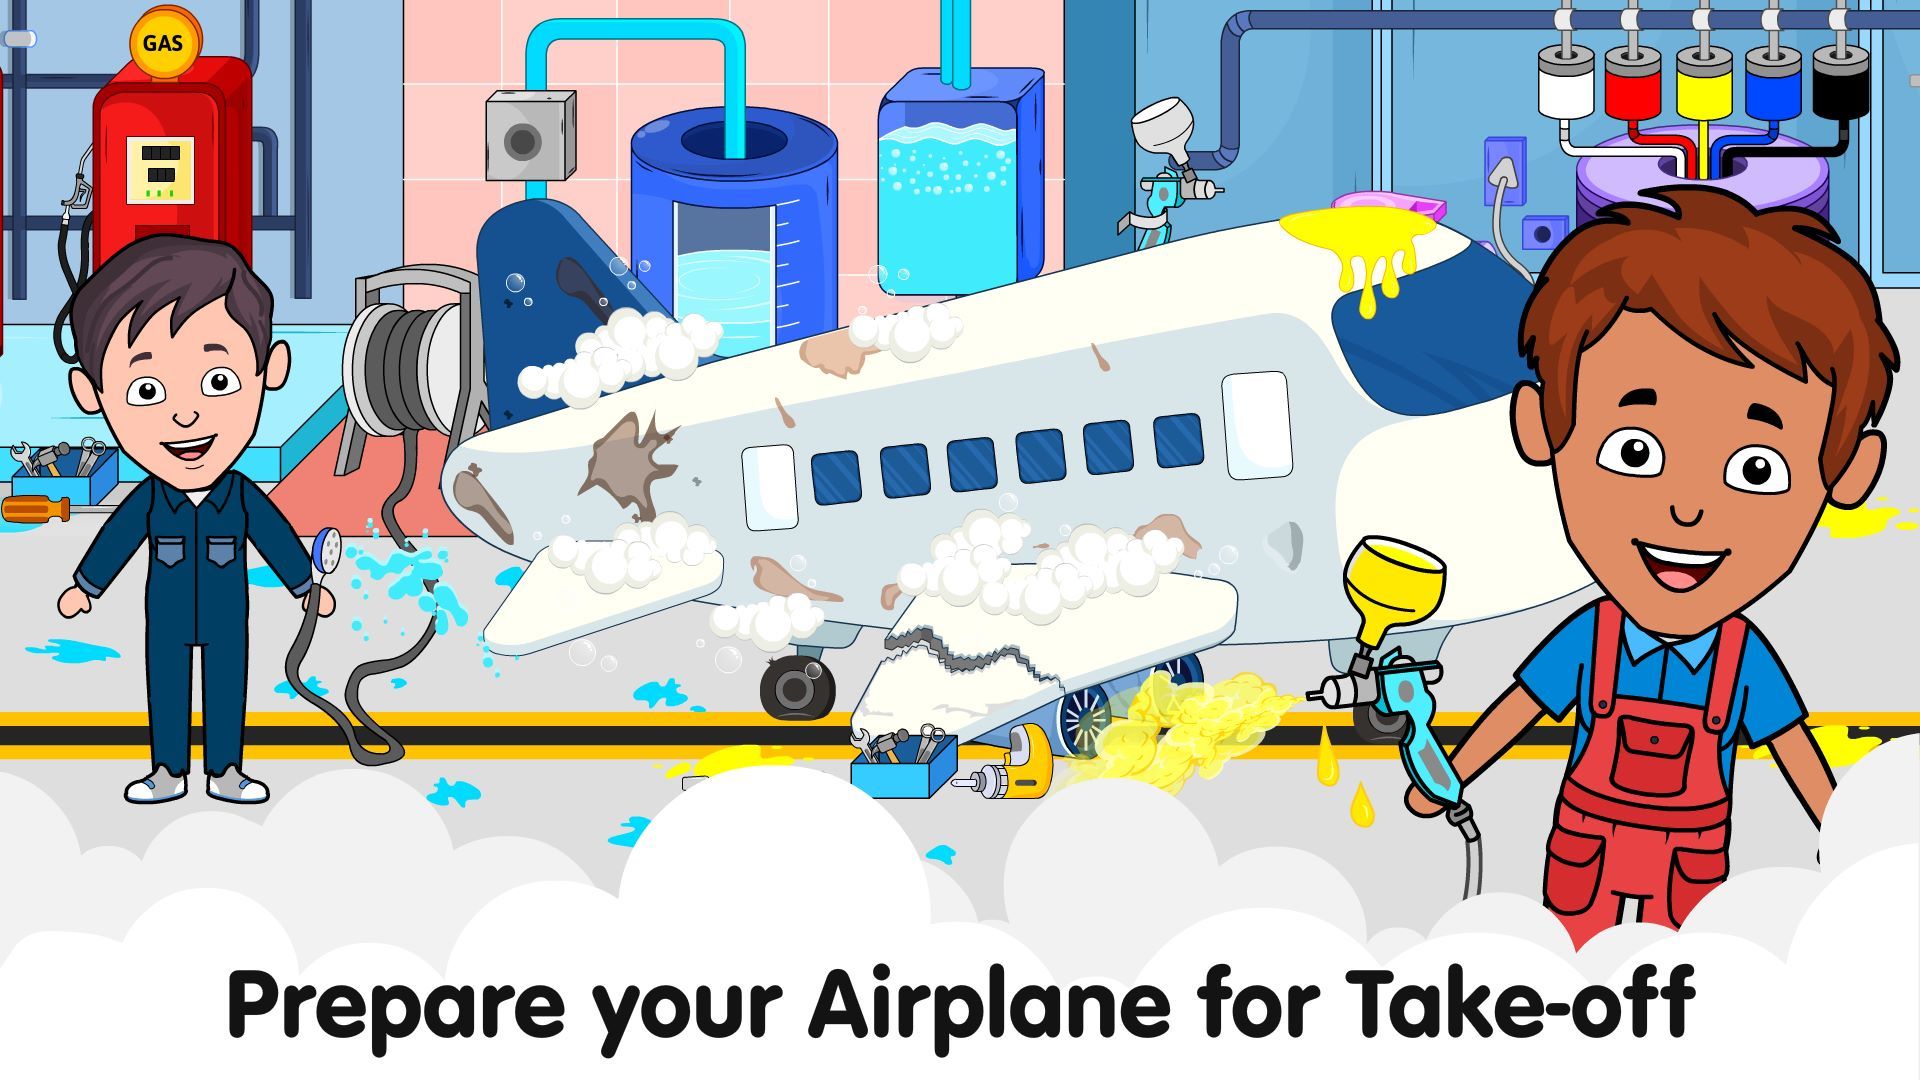 Tizi Town Airport City : My Airplane Games for Kids Free